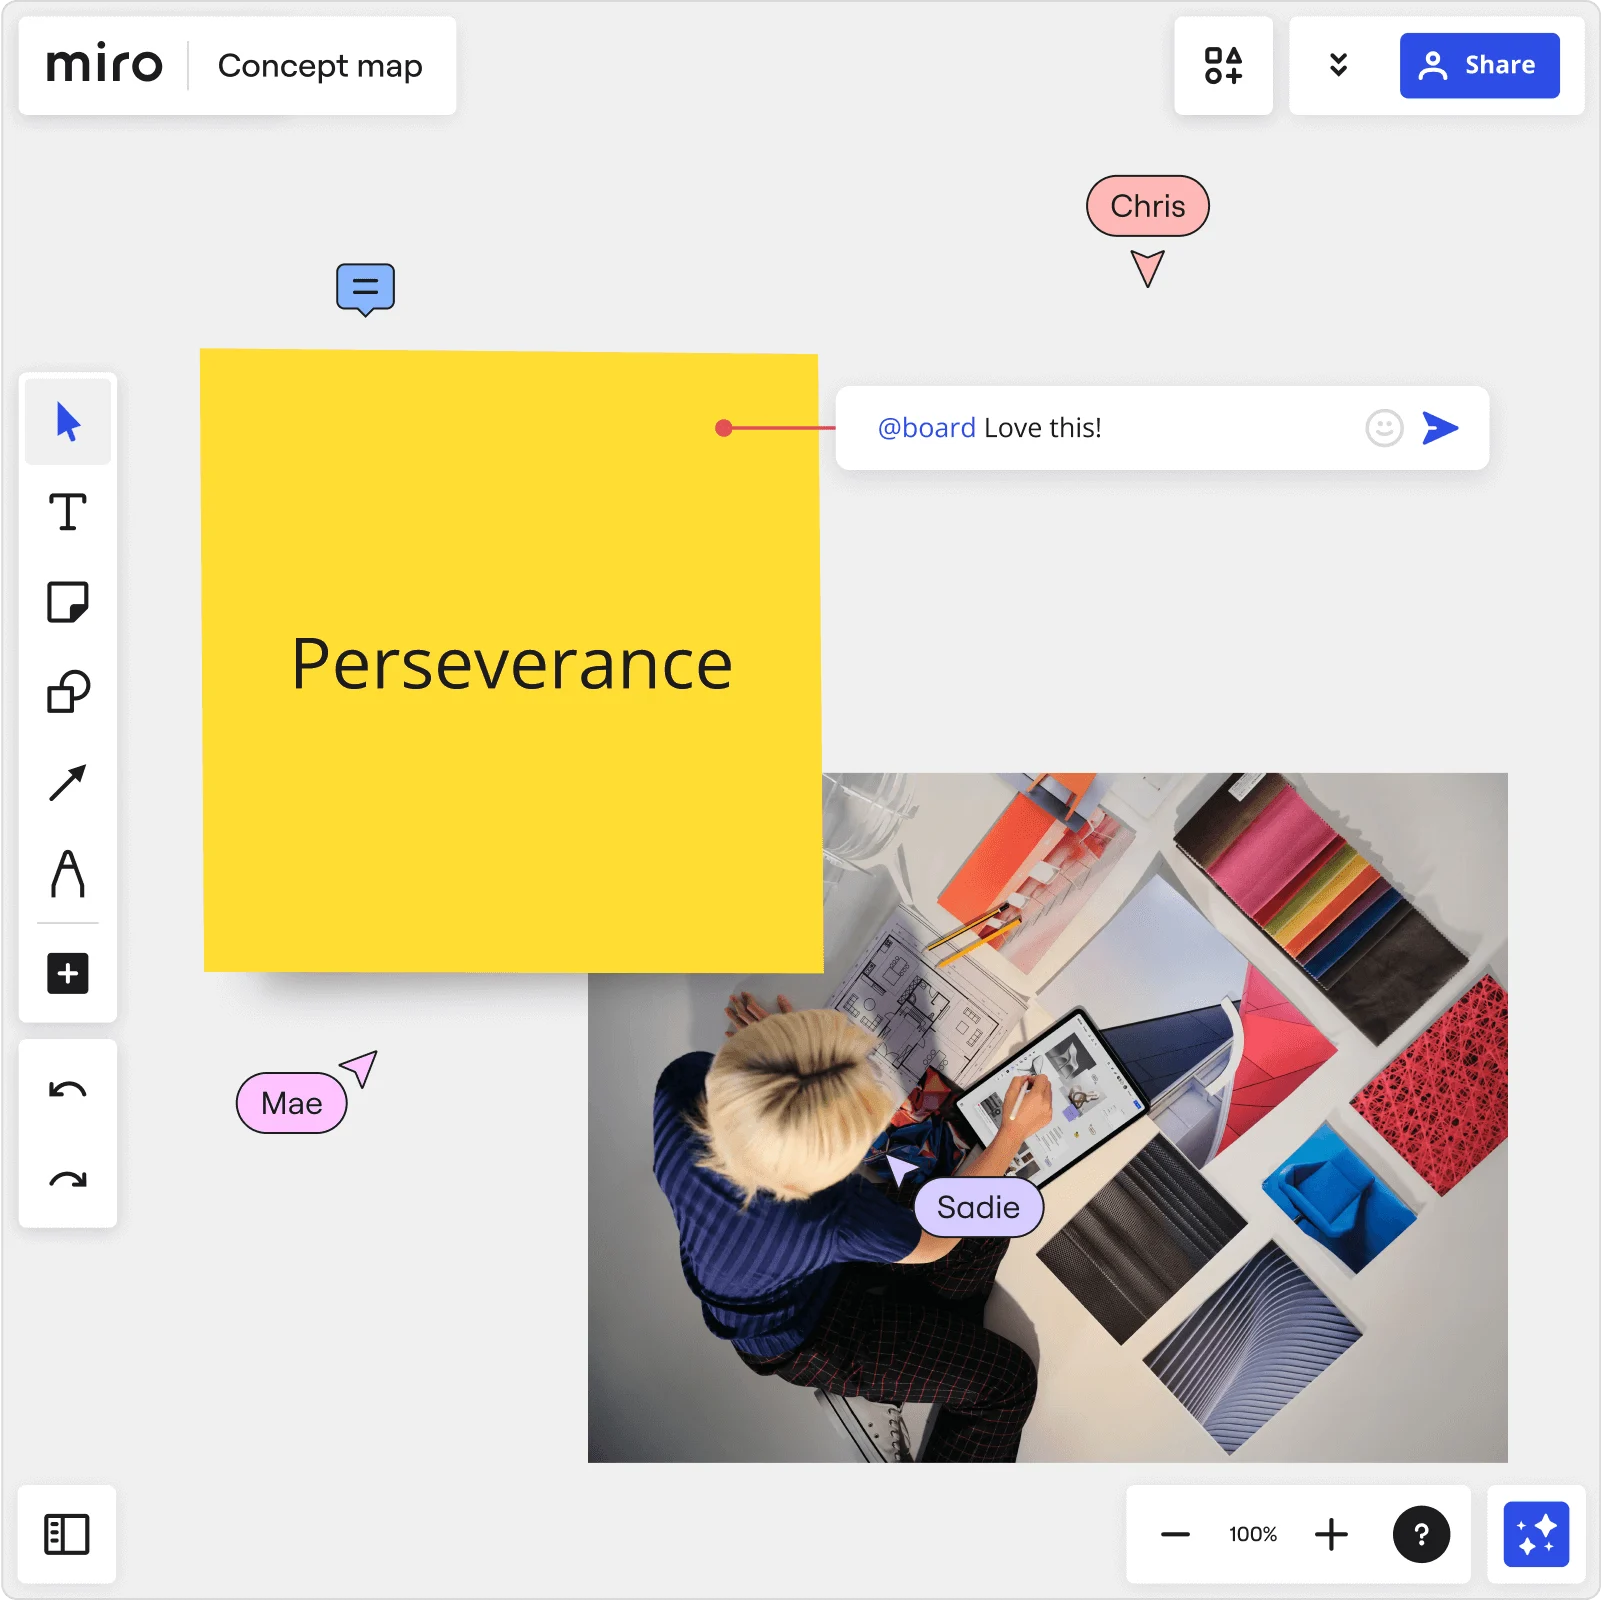 Collaborate and share your thought with Miro's concept map maker